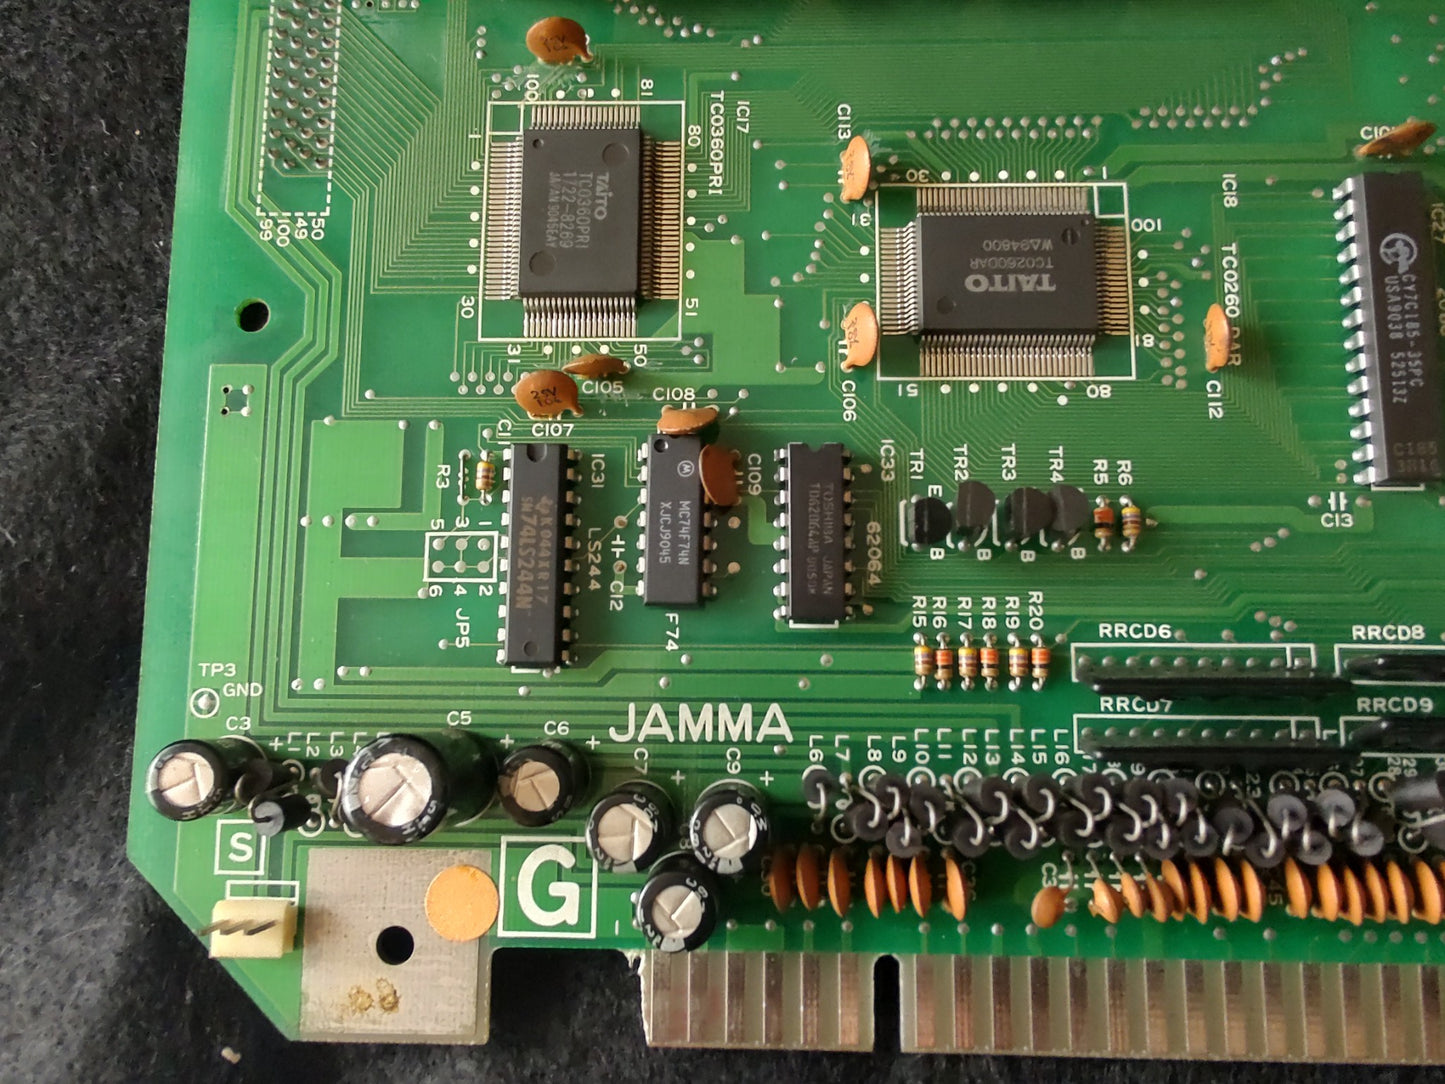 RUNARK TAITO F2 Arcard System JAMMA B Board and Inst card set, Working-g0323-